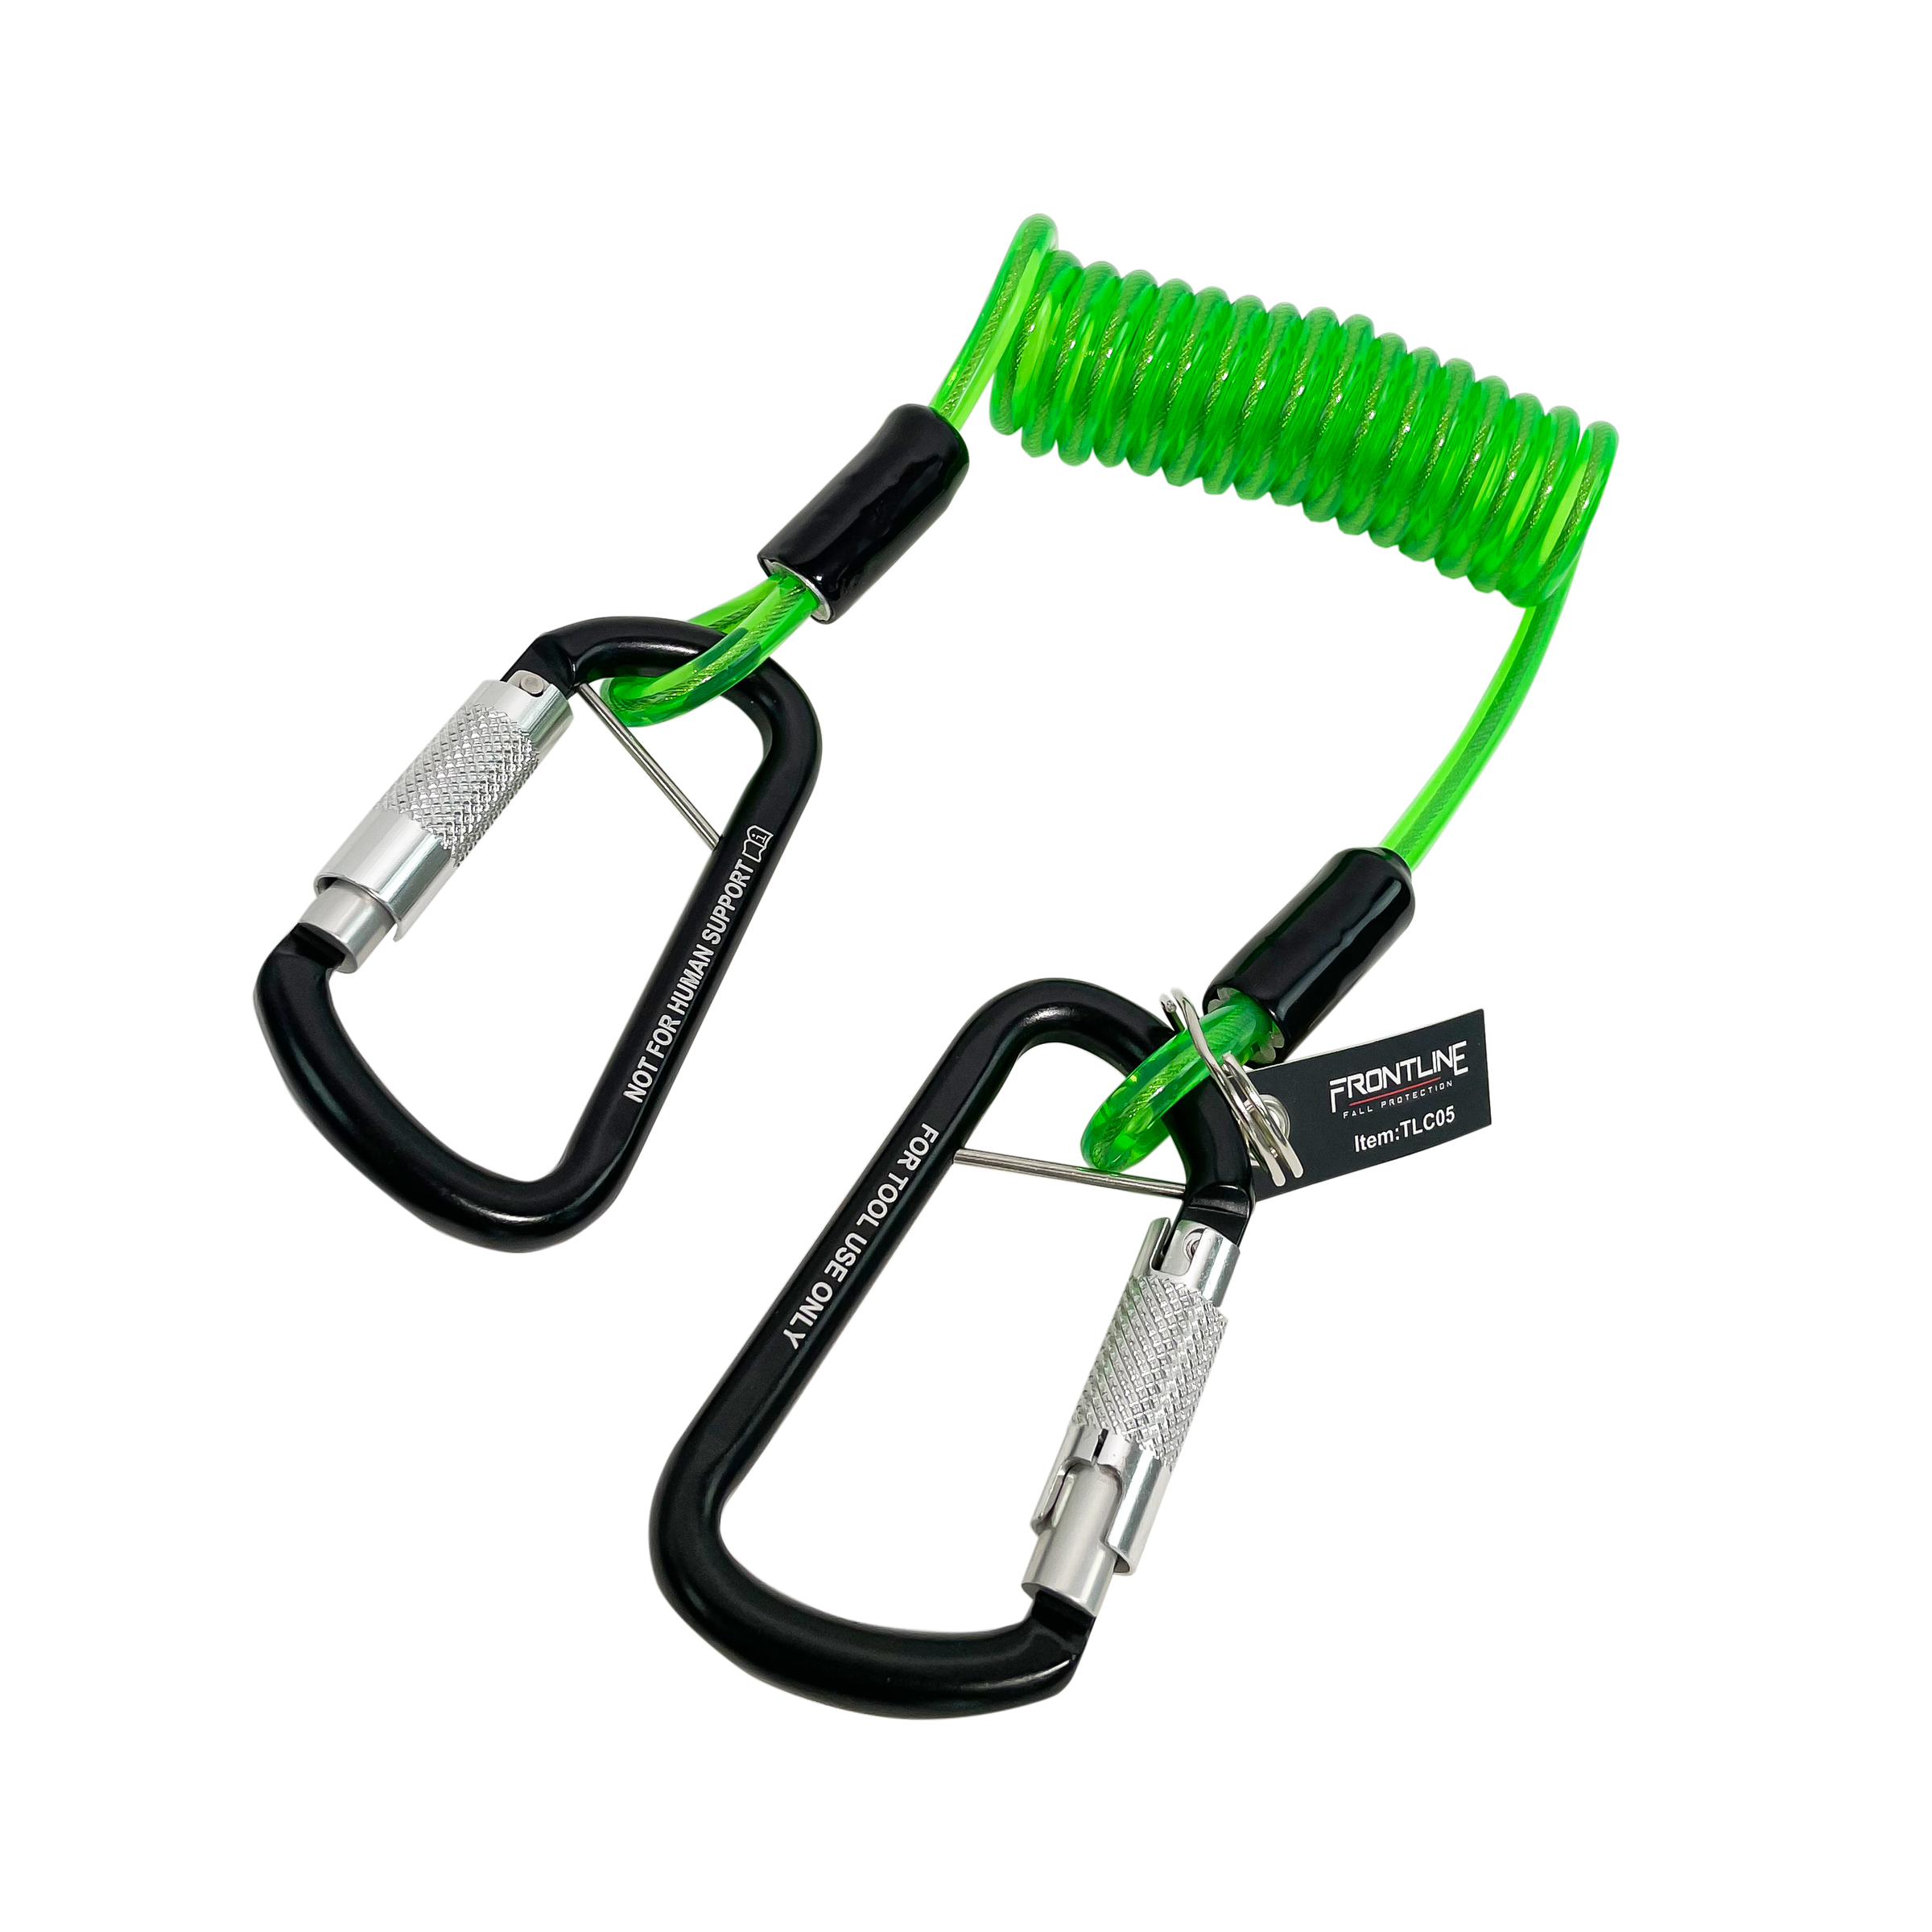 TLC05 ToolGrip Coil Tool Tether 5 lbs with Double Self-locking Aluminum Carabiner